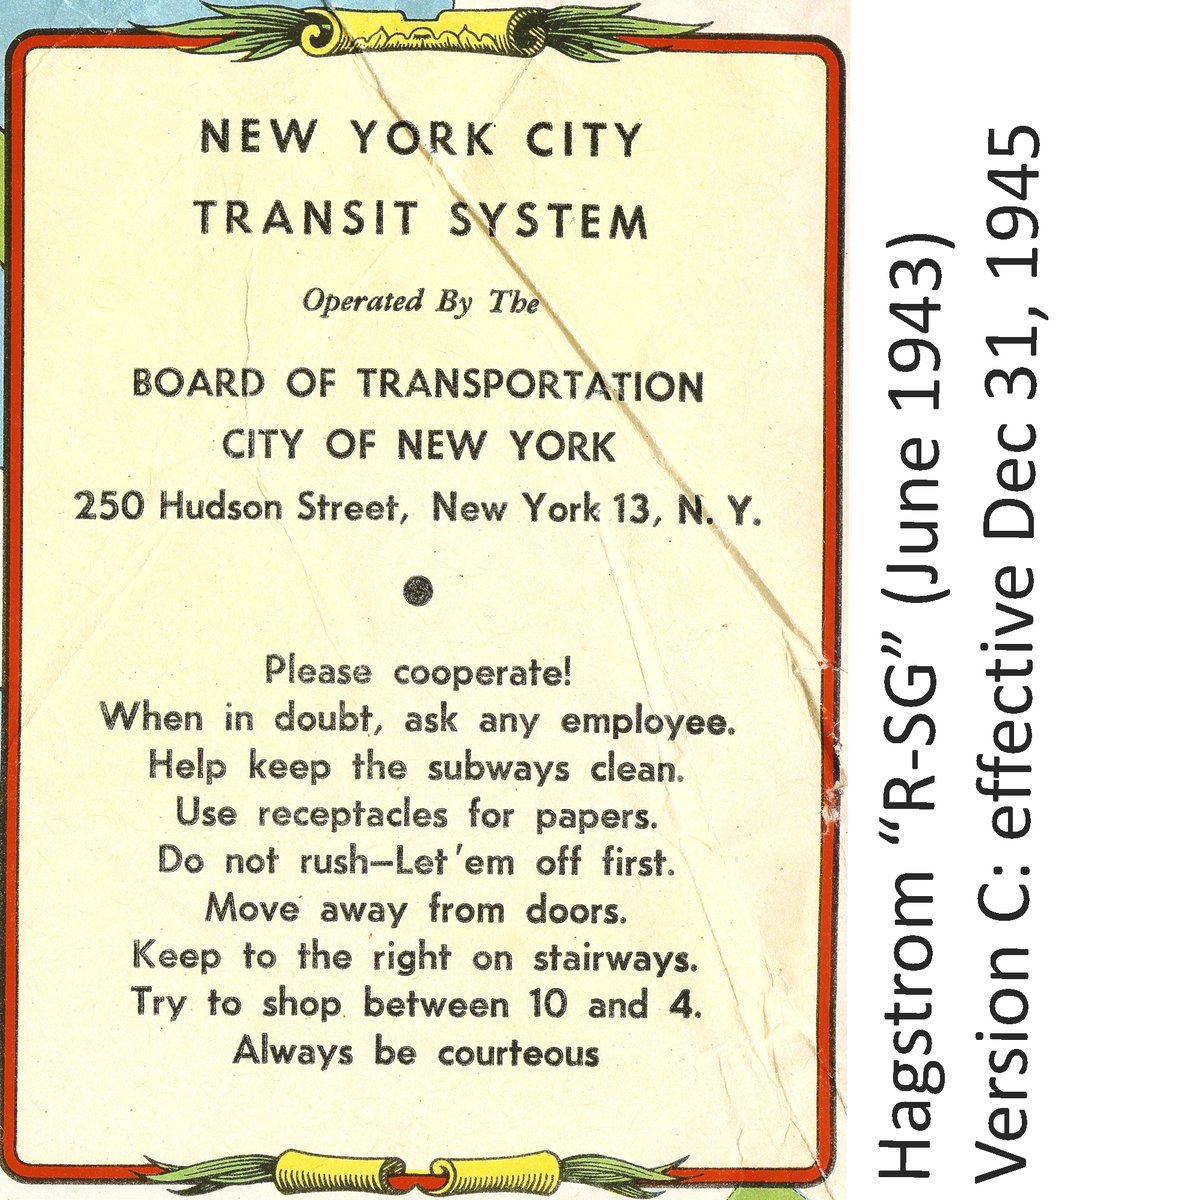 1/3 The first Hagstrom subway maps issued as official by the Board of Transportation kept a fixed date code ('R-SG' = Jun '43) but the cartouche changed in a curious way in the version that was effective from Dec 31, '45 (indicated by the deletion of the IRT City Hall station).